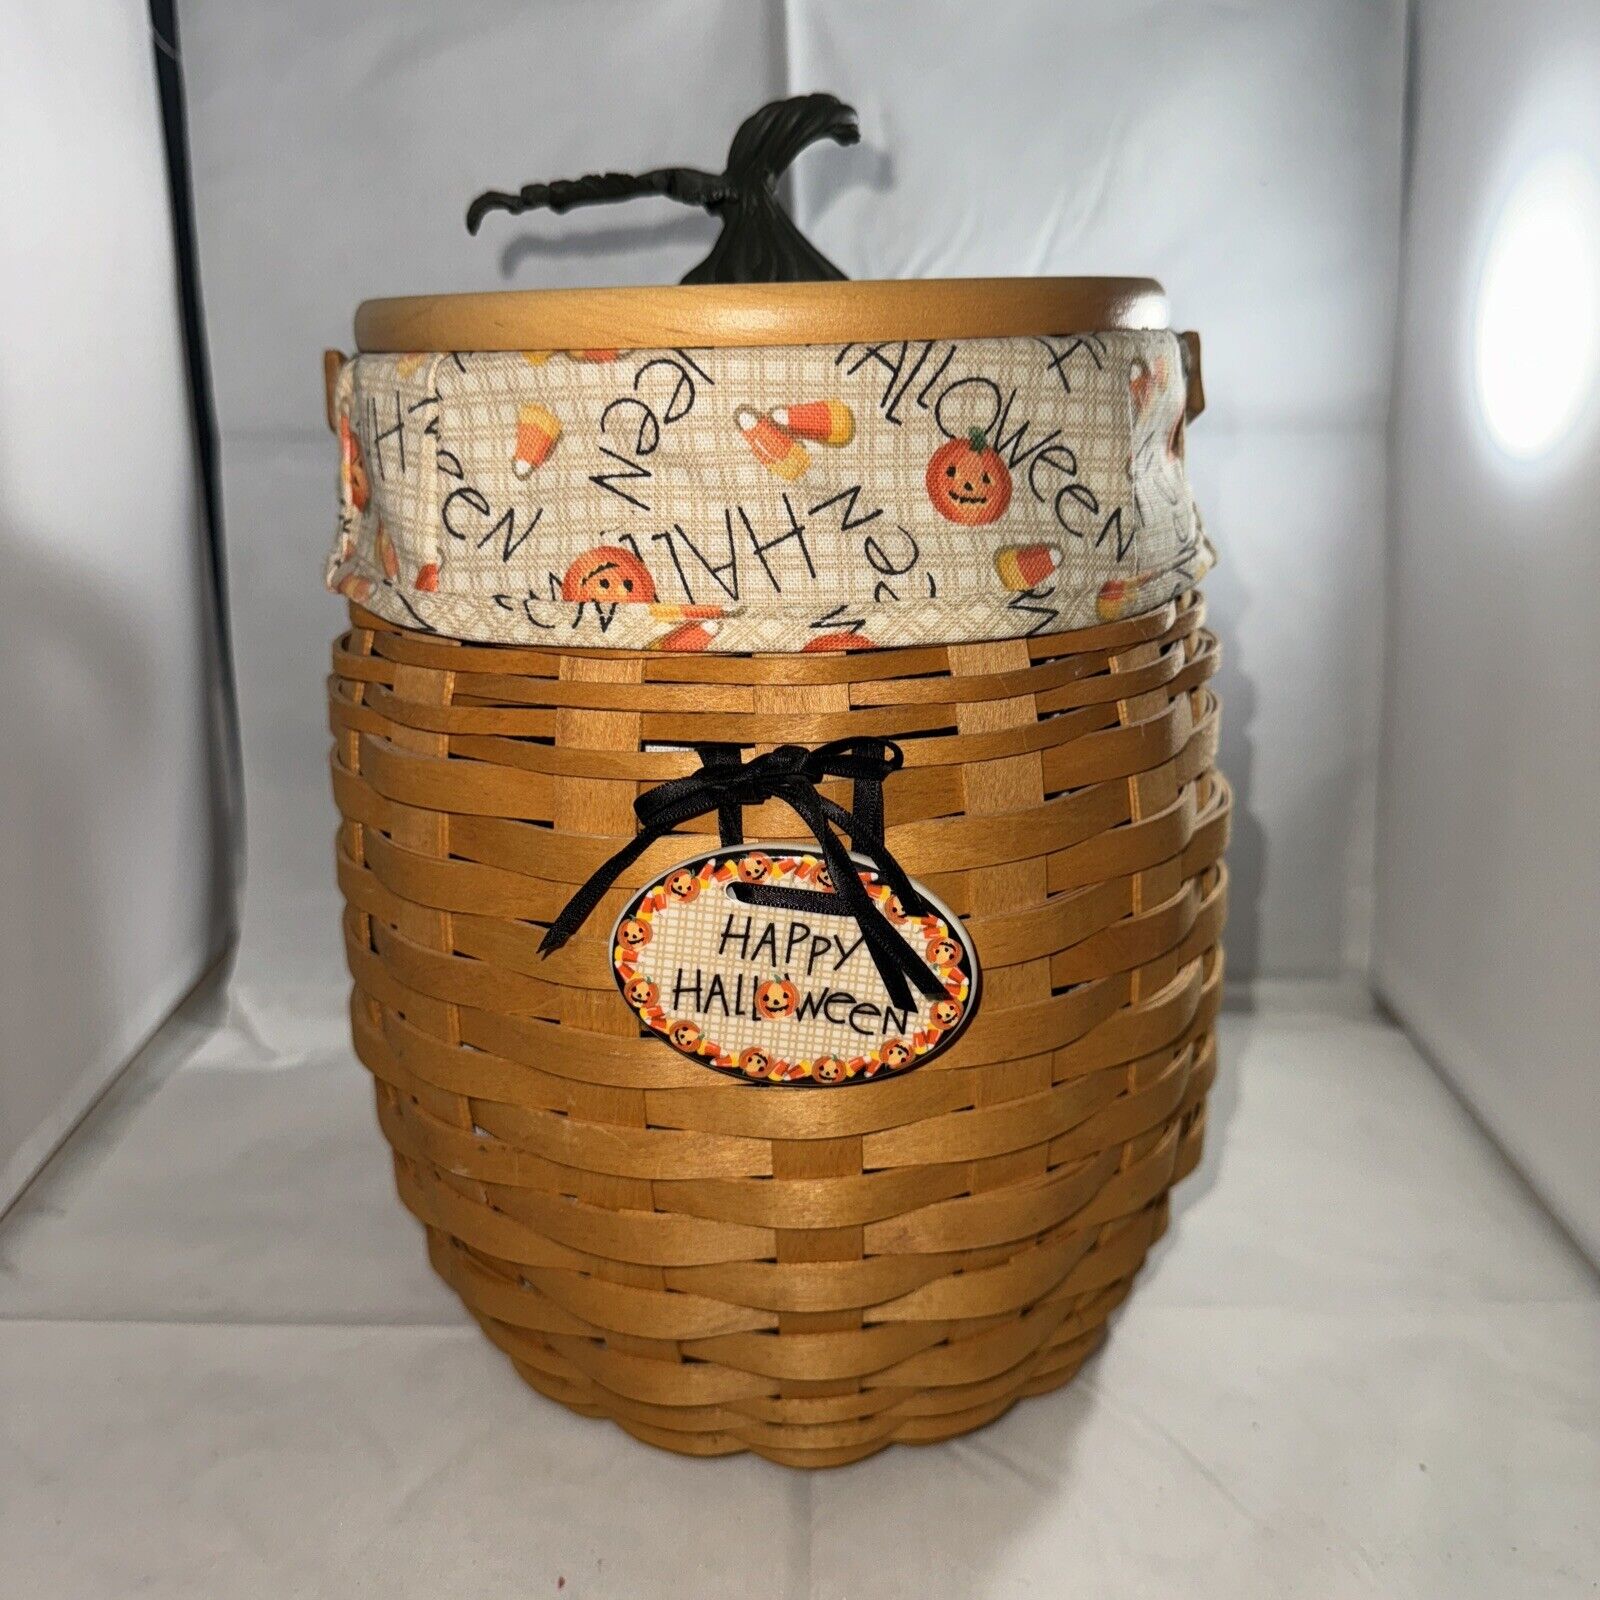 Longaberger 2000 One Pumkin Basket With Lid and Protector Happy Halloween Series